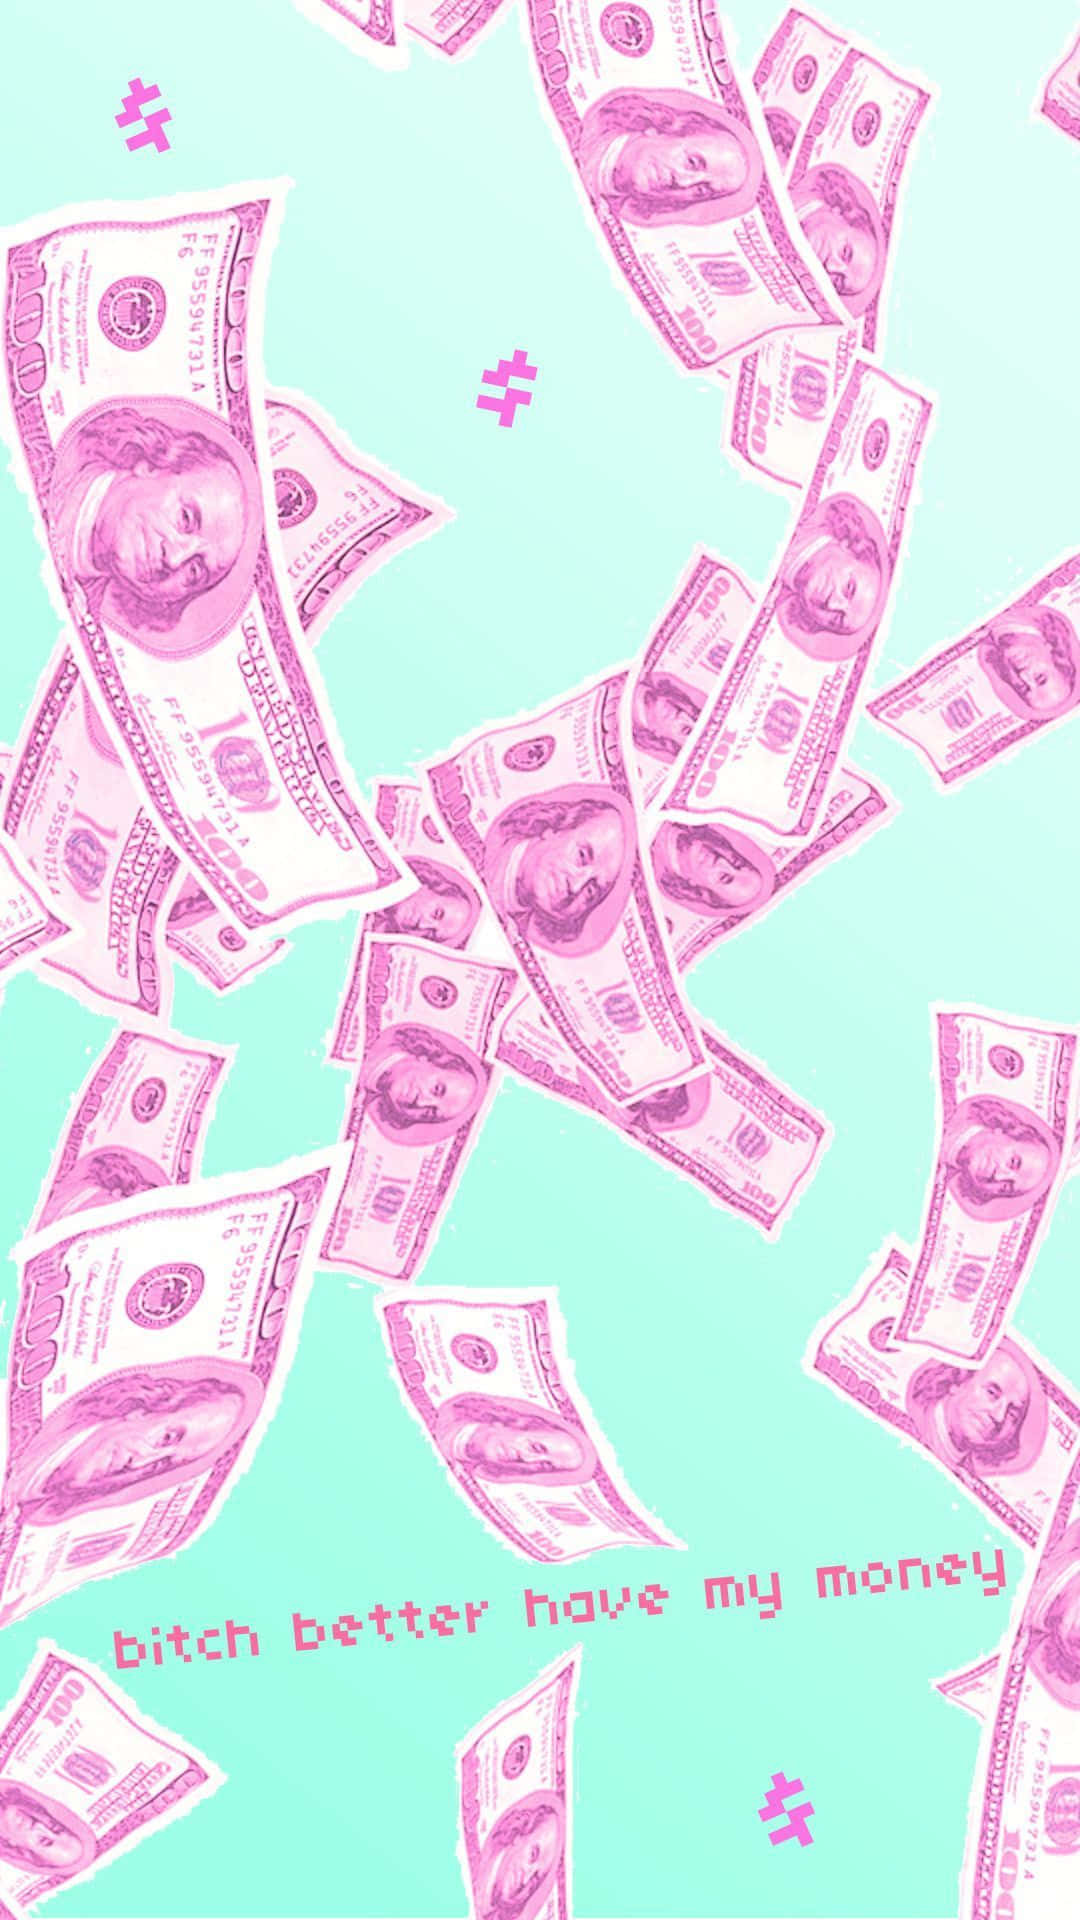 A Pink And Blue Background With Money Flying In The Air